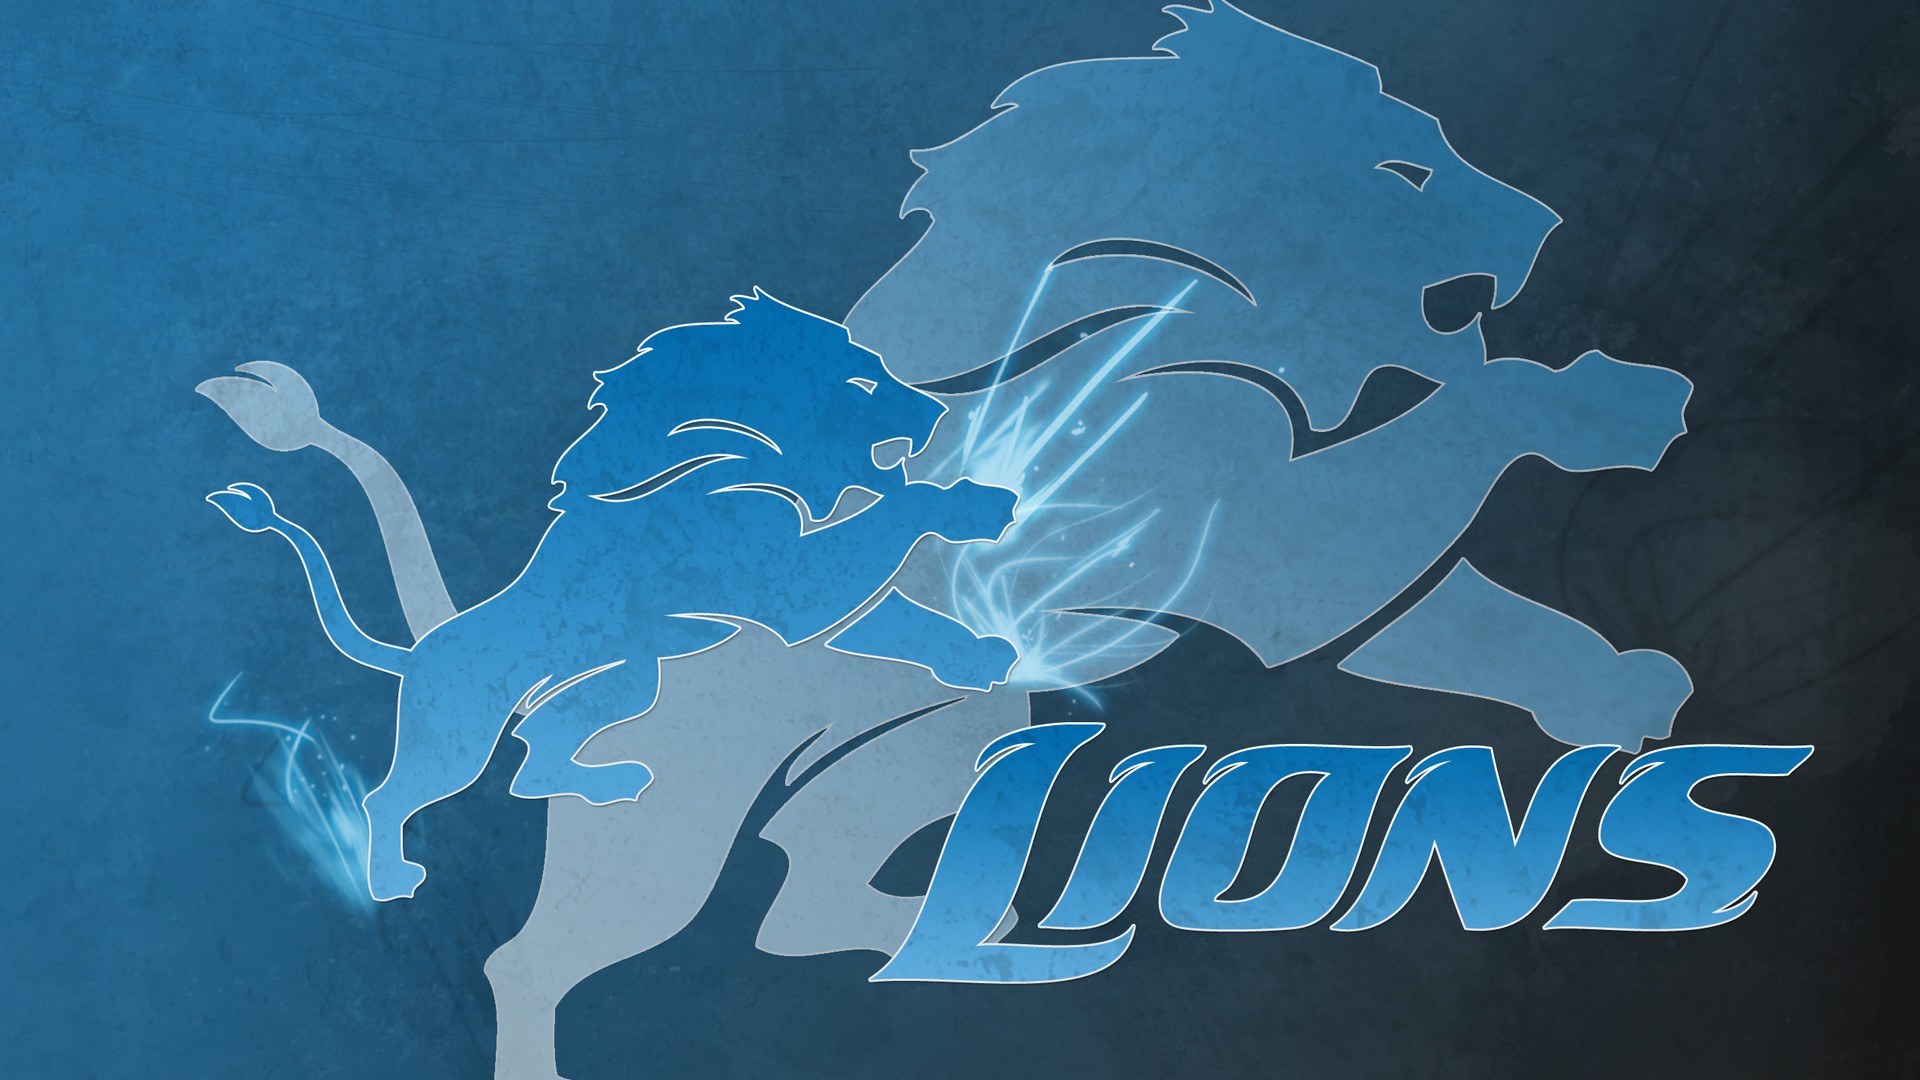 Best Detroit Lions Wallpaper in HD with high-resolution 1920x1080 pixel. Download and set as wallpaper for Desktop Computer, Apple iPhone X, XS Max, XR, 8, 7, 6, SE, iPad, Android